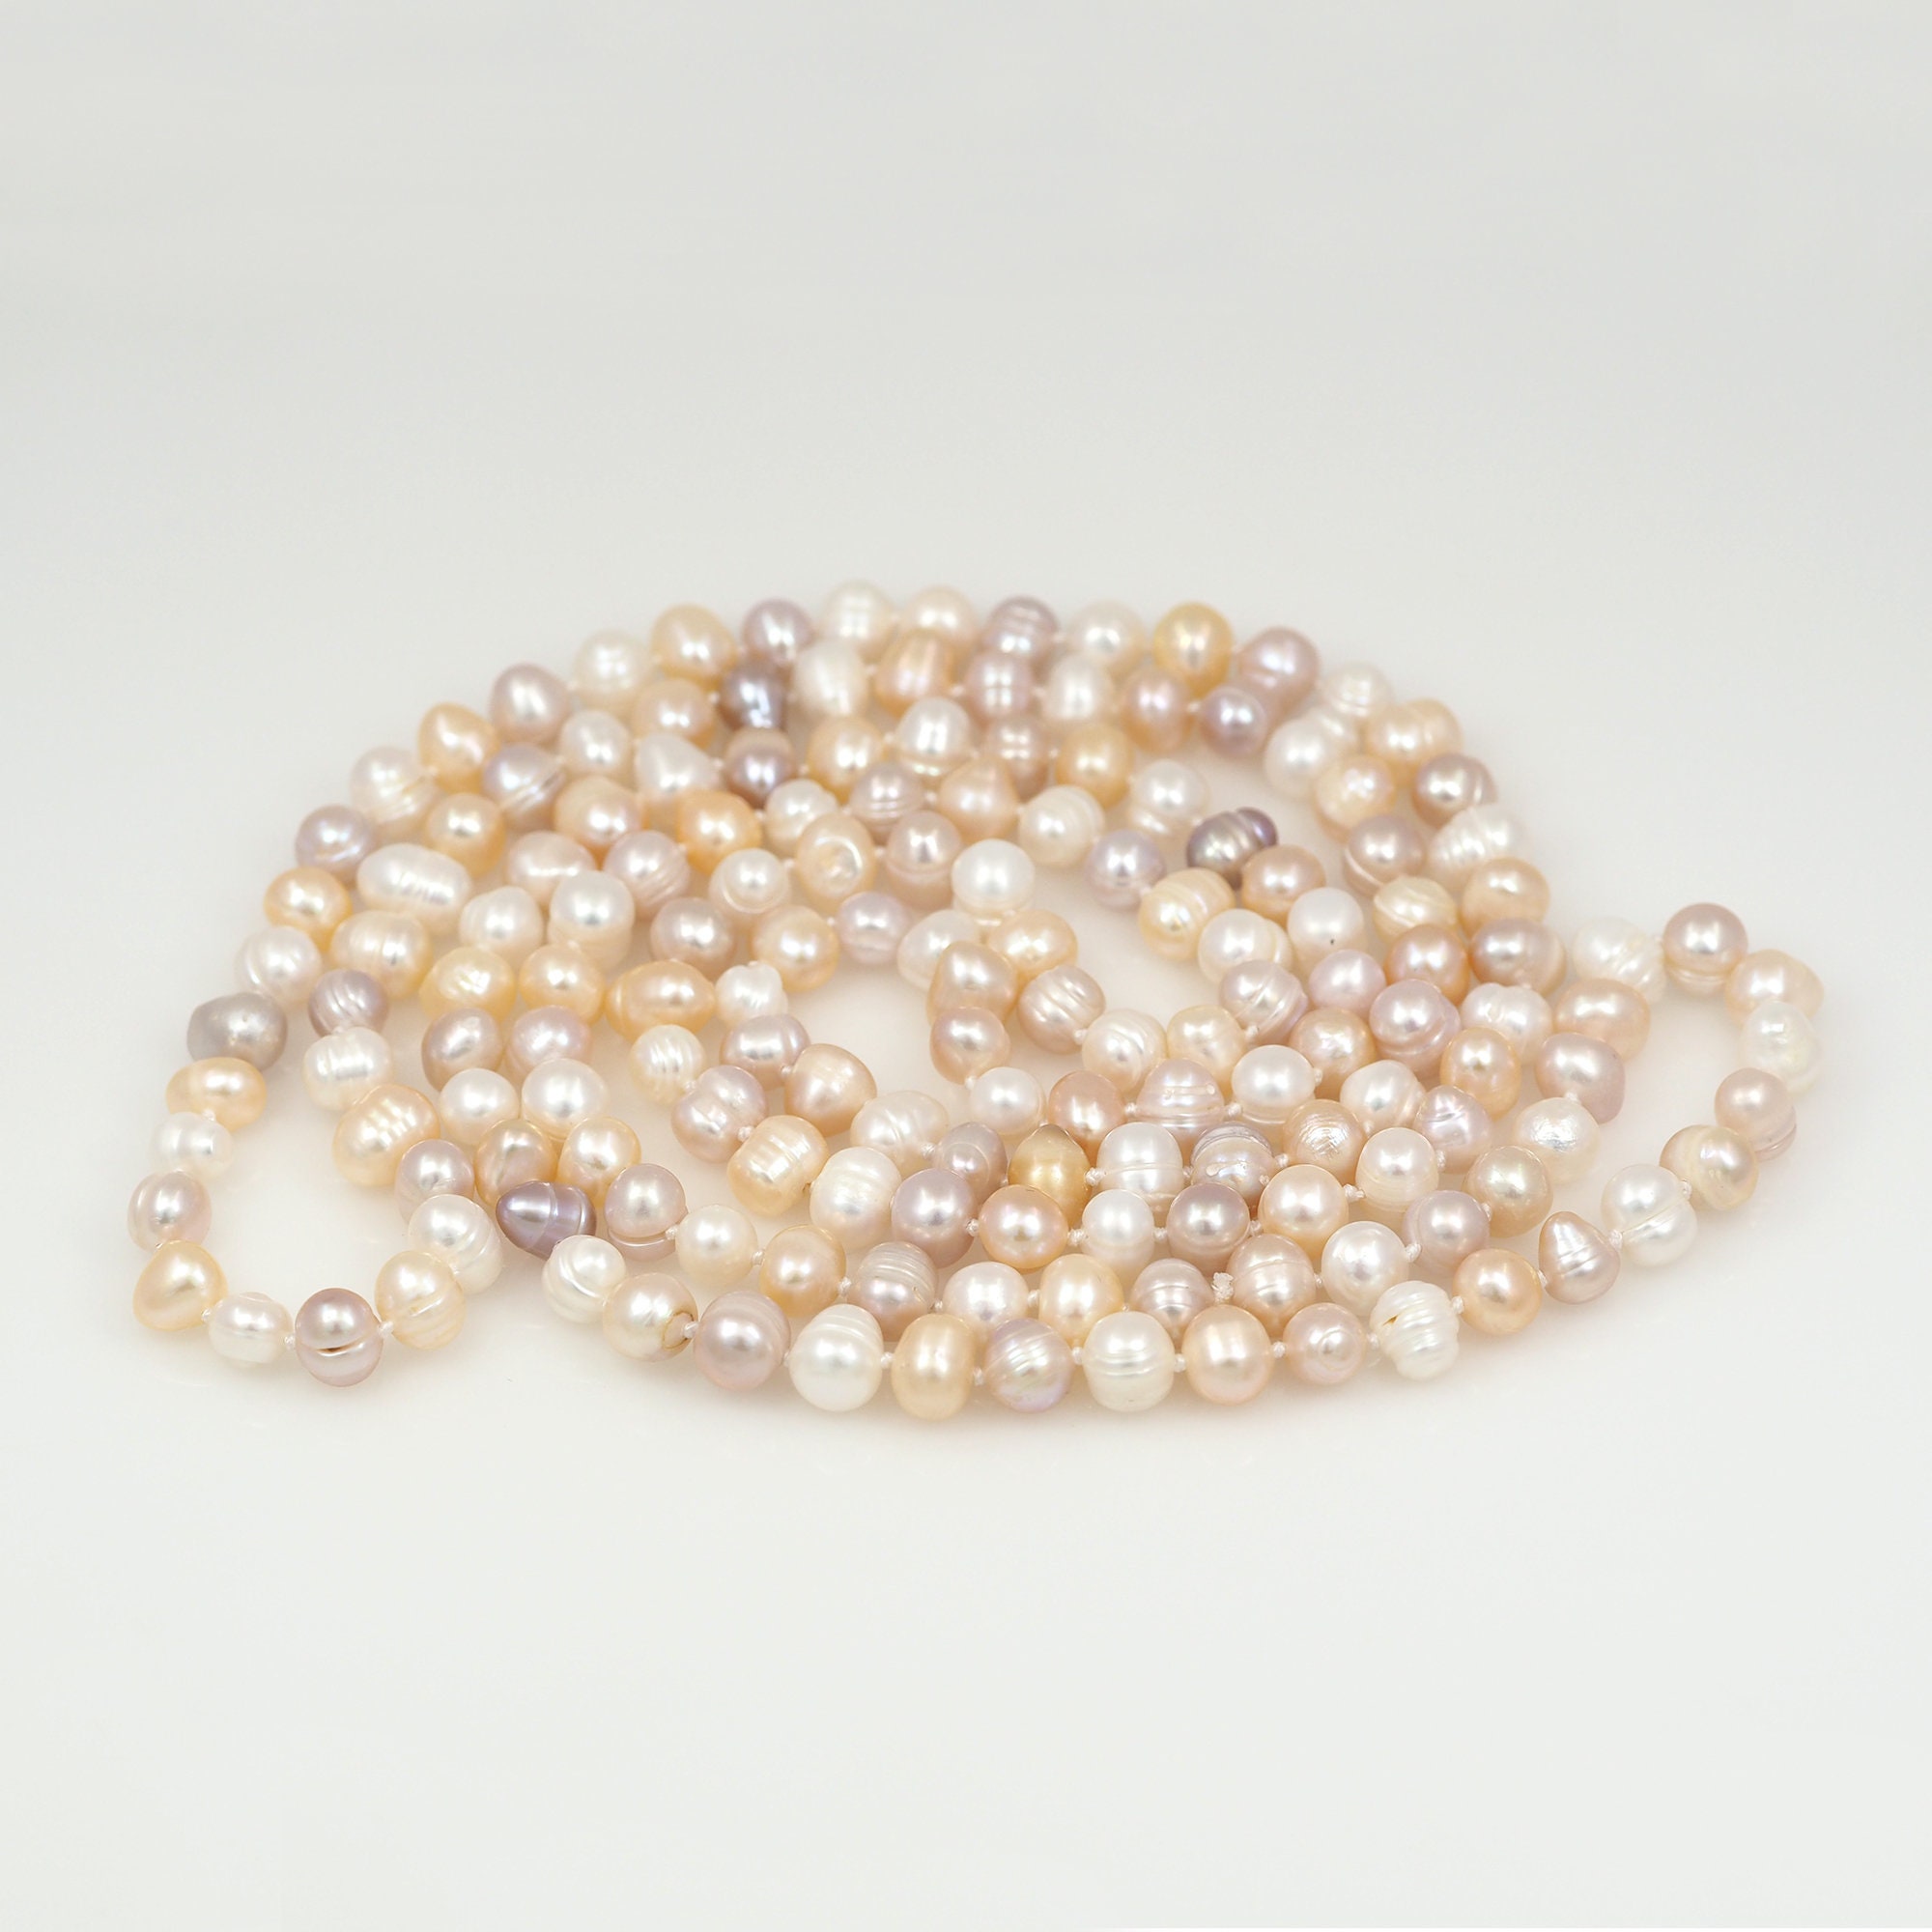 1 Str, Gold Pearl Necklace, Irregular Pearl, AAA, Real Freshwater Pearl,  DIY Pearl Accessories, Multi-Size Pearls, Length 35 cm